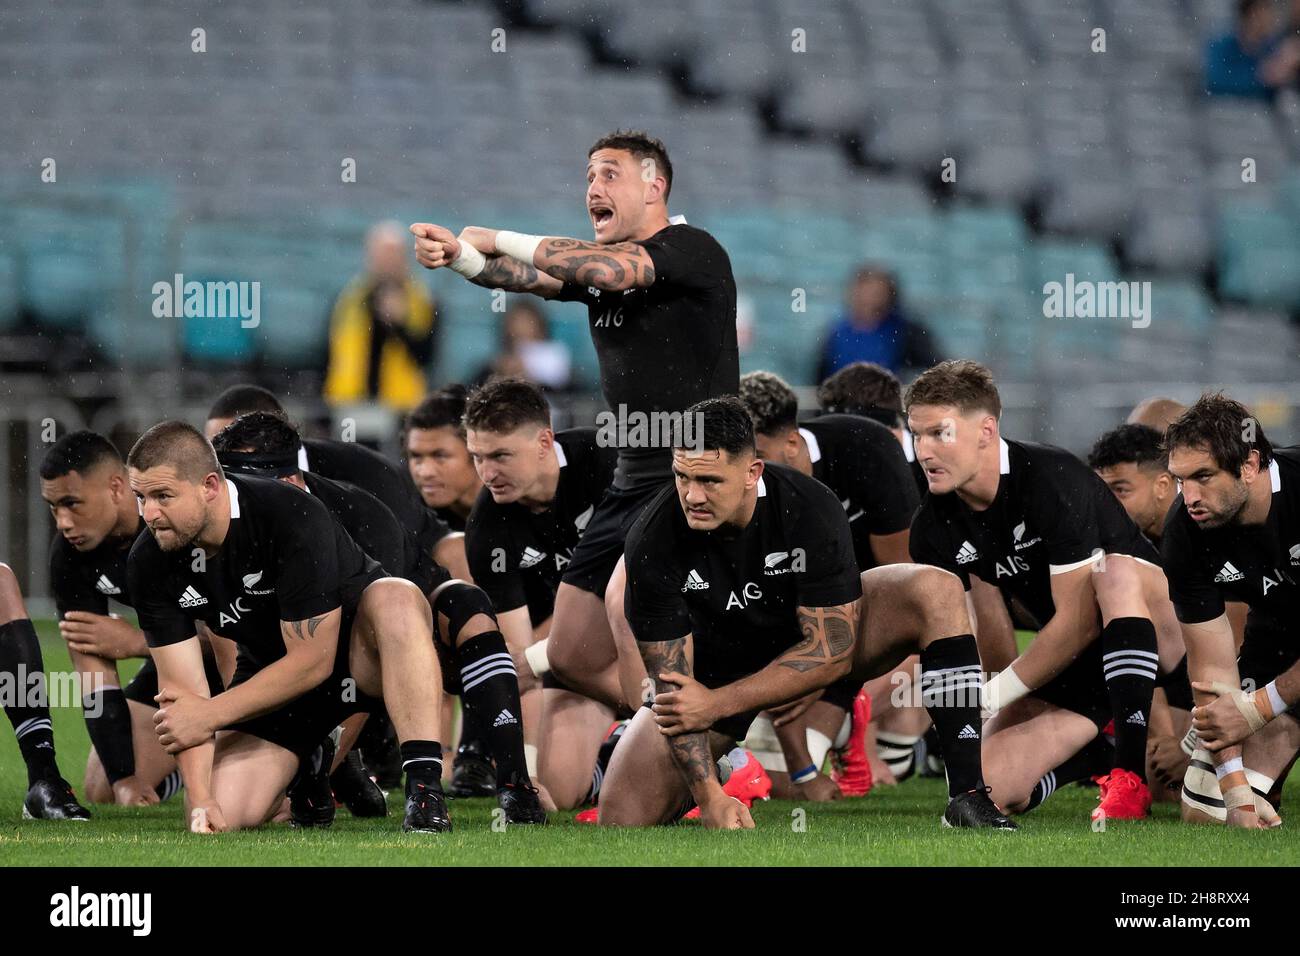 New Zealand perform the Haka before the Bledisloe Cup match between the Australian Wallabies and the New Zealand All Blacks at ANZ Stadium on October 31, 2020 in Sydney, Australia